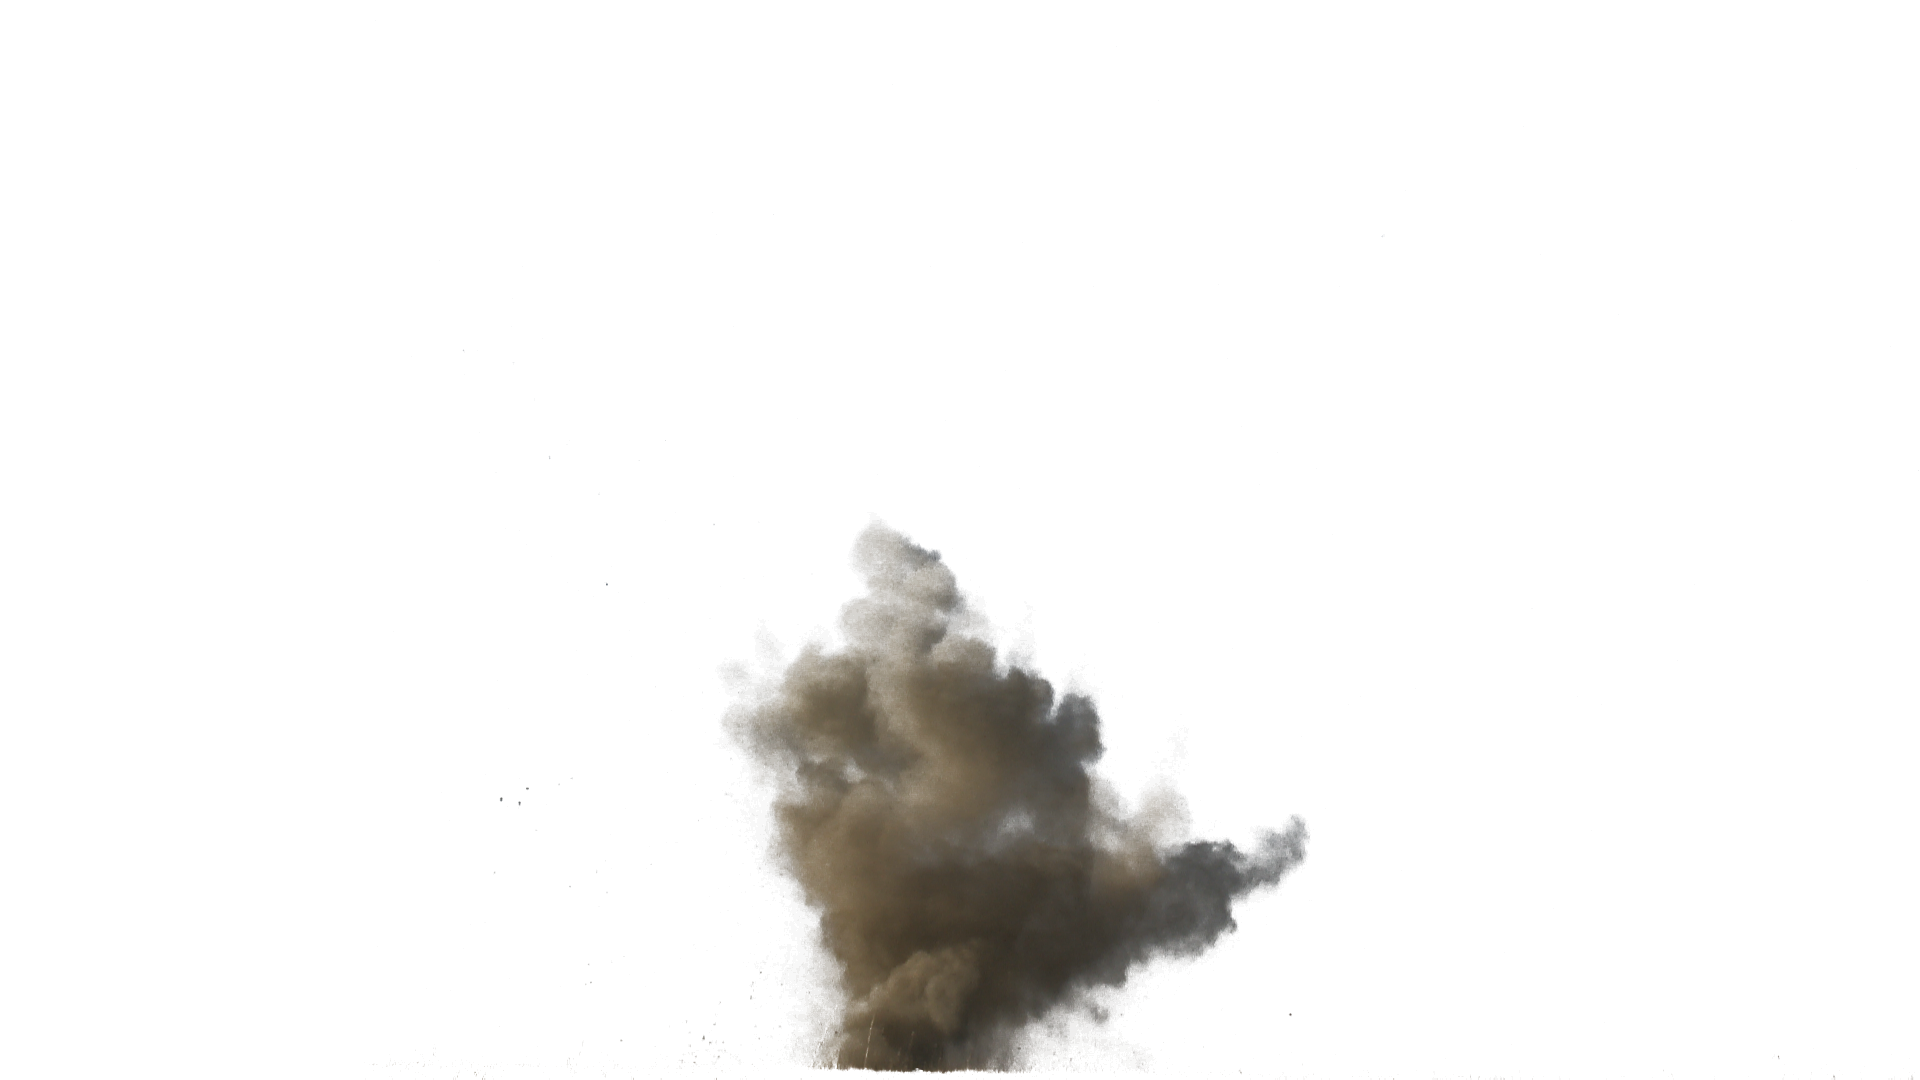 Free: Explosion Transparent Background Gif 